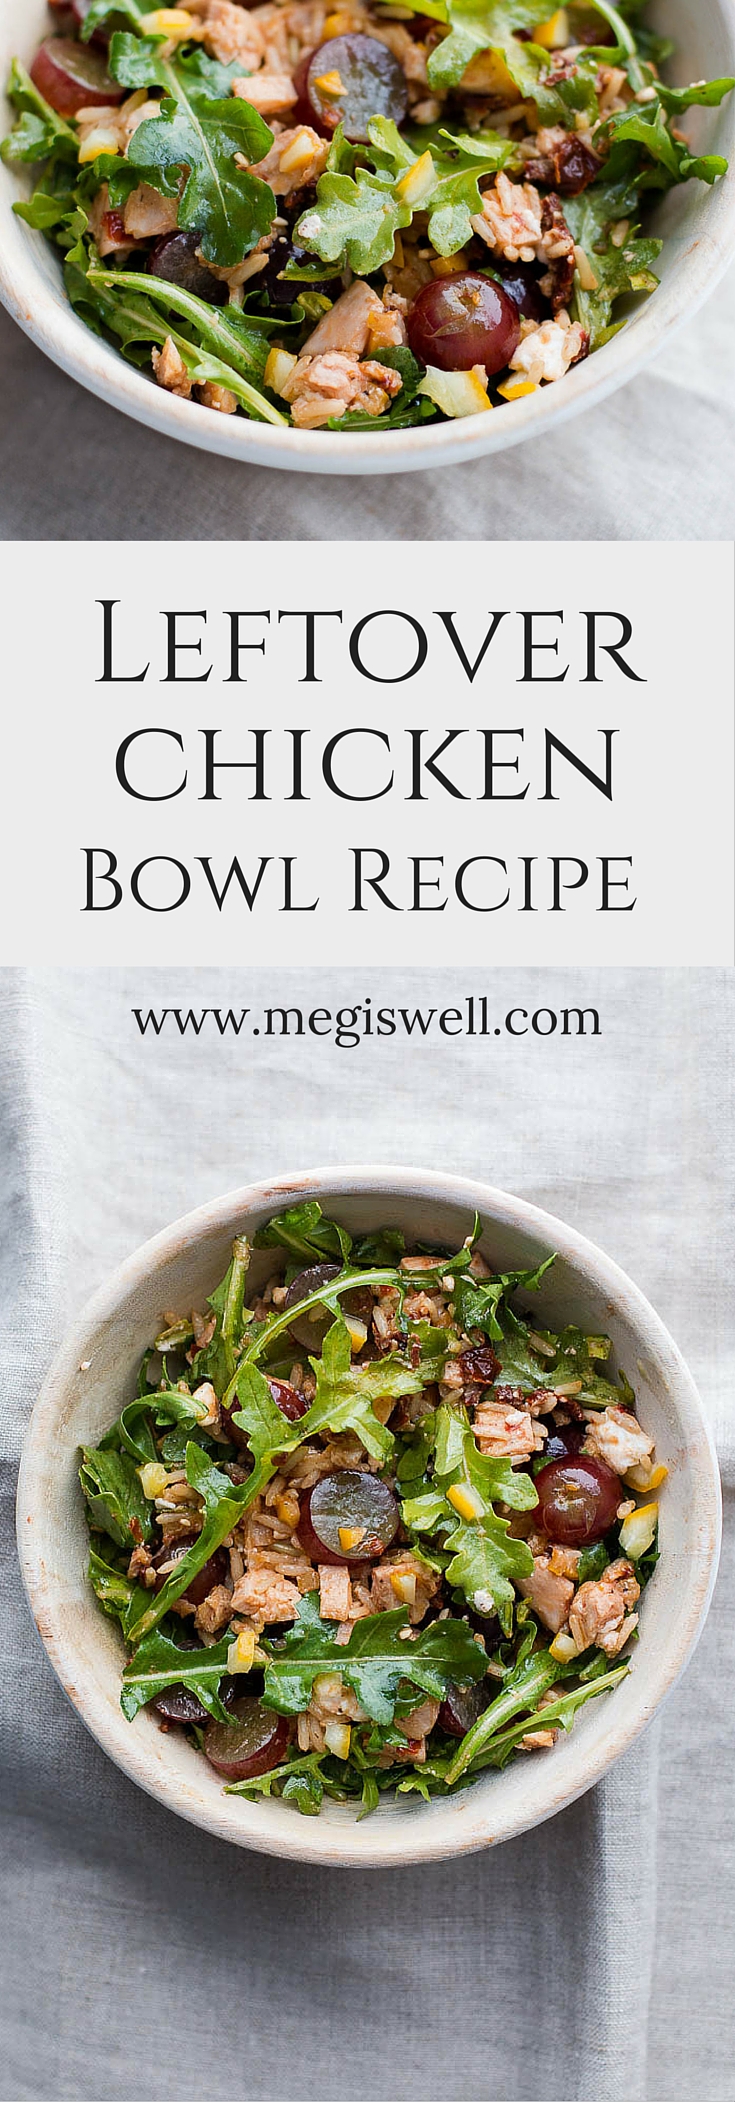 This Leftover Chicken Bowl Recipe is an easy and quick way to get rid of leftovers. Brown rice, sun dried tomatoes, preserved lemon, feta, grapes, and arugula combine for a light, healthy, and filling bowl. | www.megiswell.com